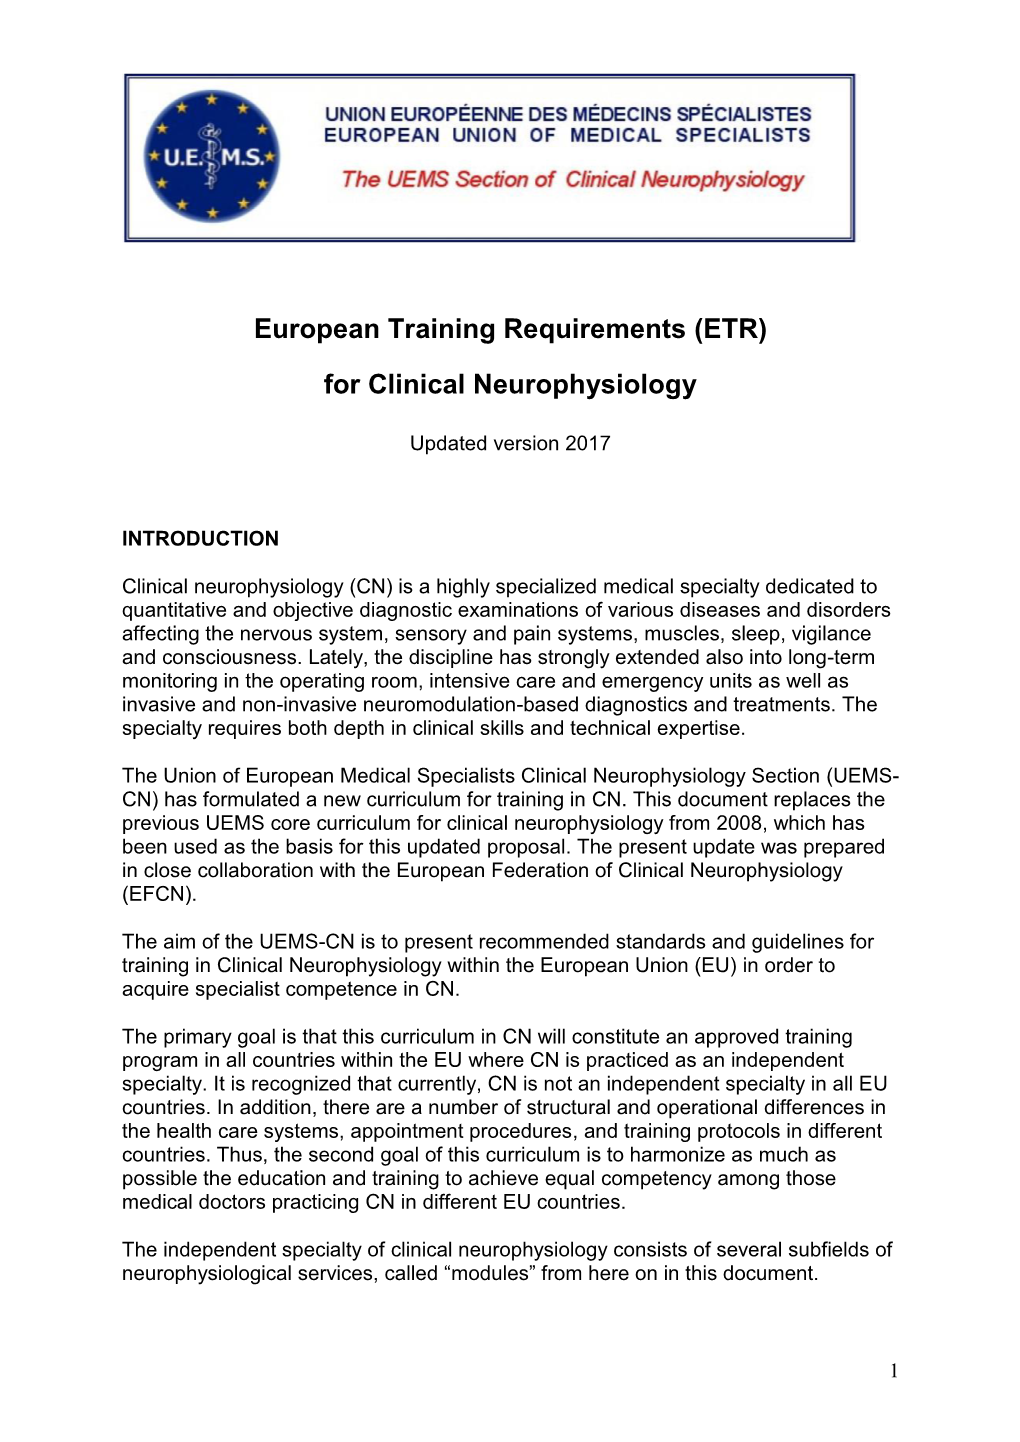 European Training Requirements (ETR) for Clinical Neurophysiology